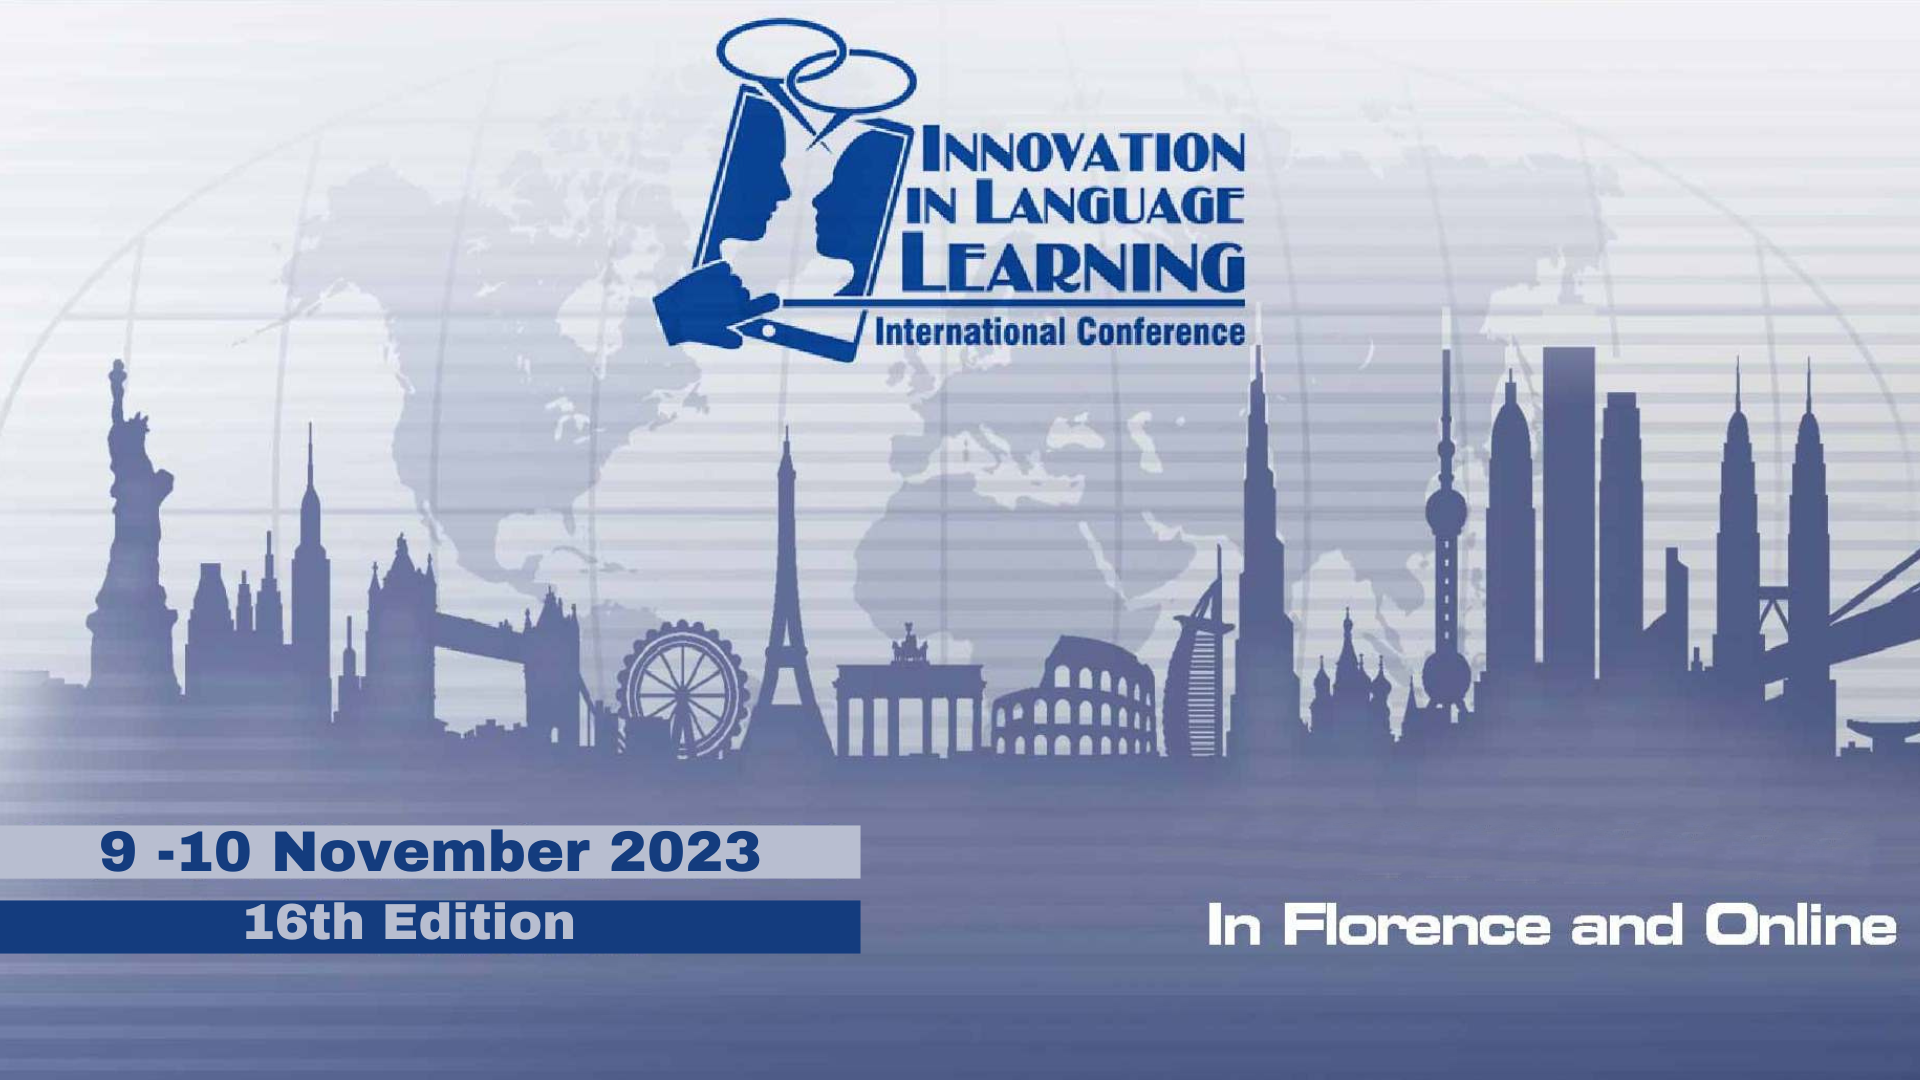 Innovation in Language Learning International Conference, Florence, Toscana, Italy